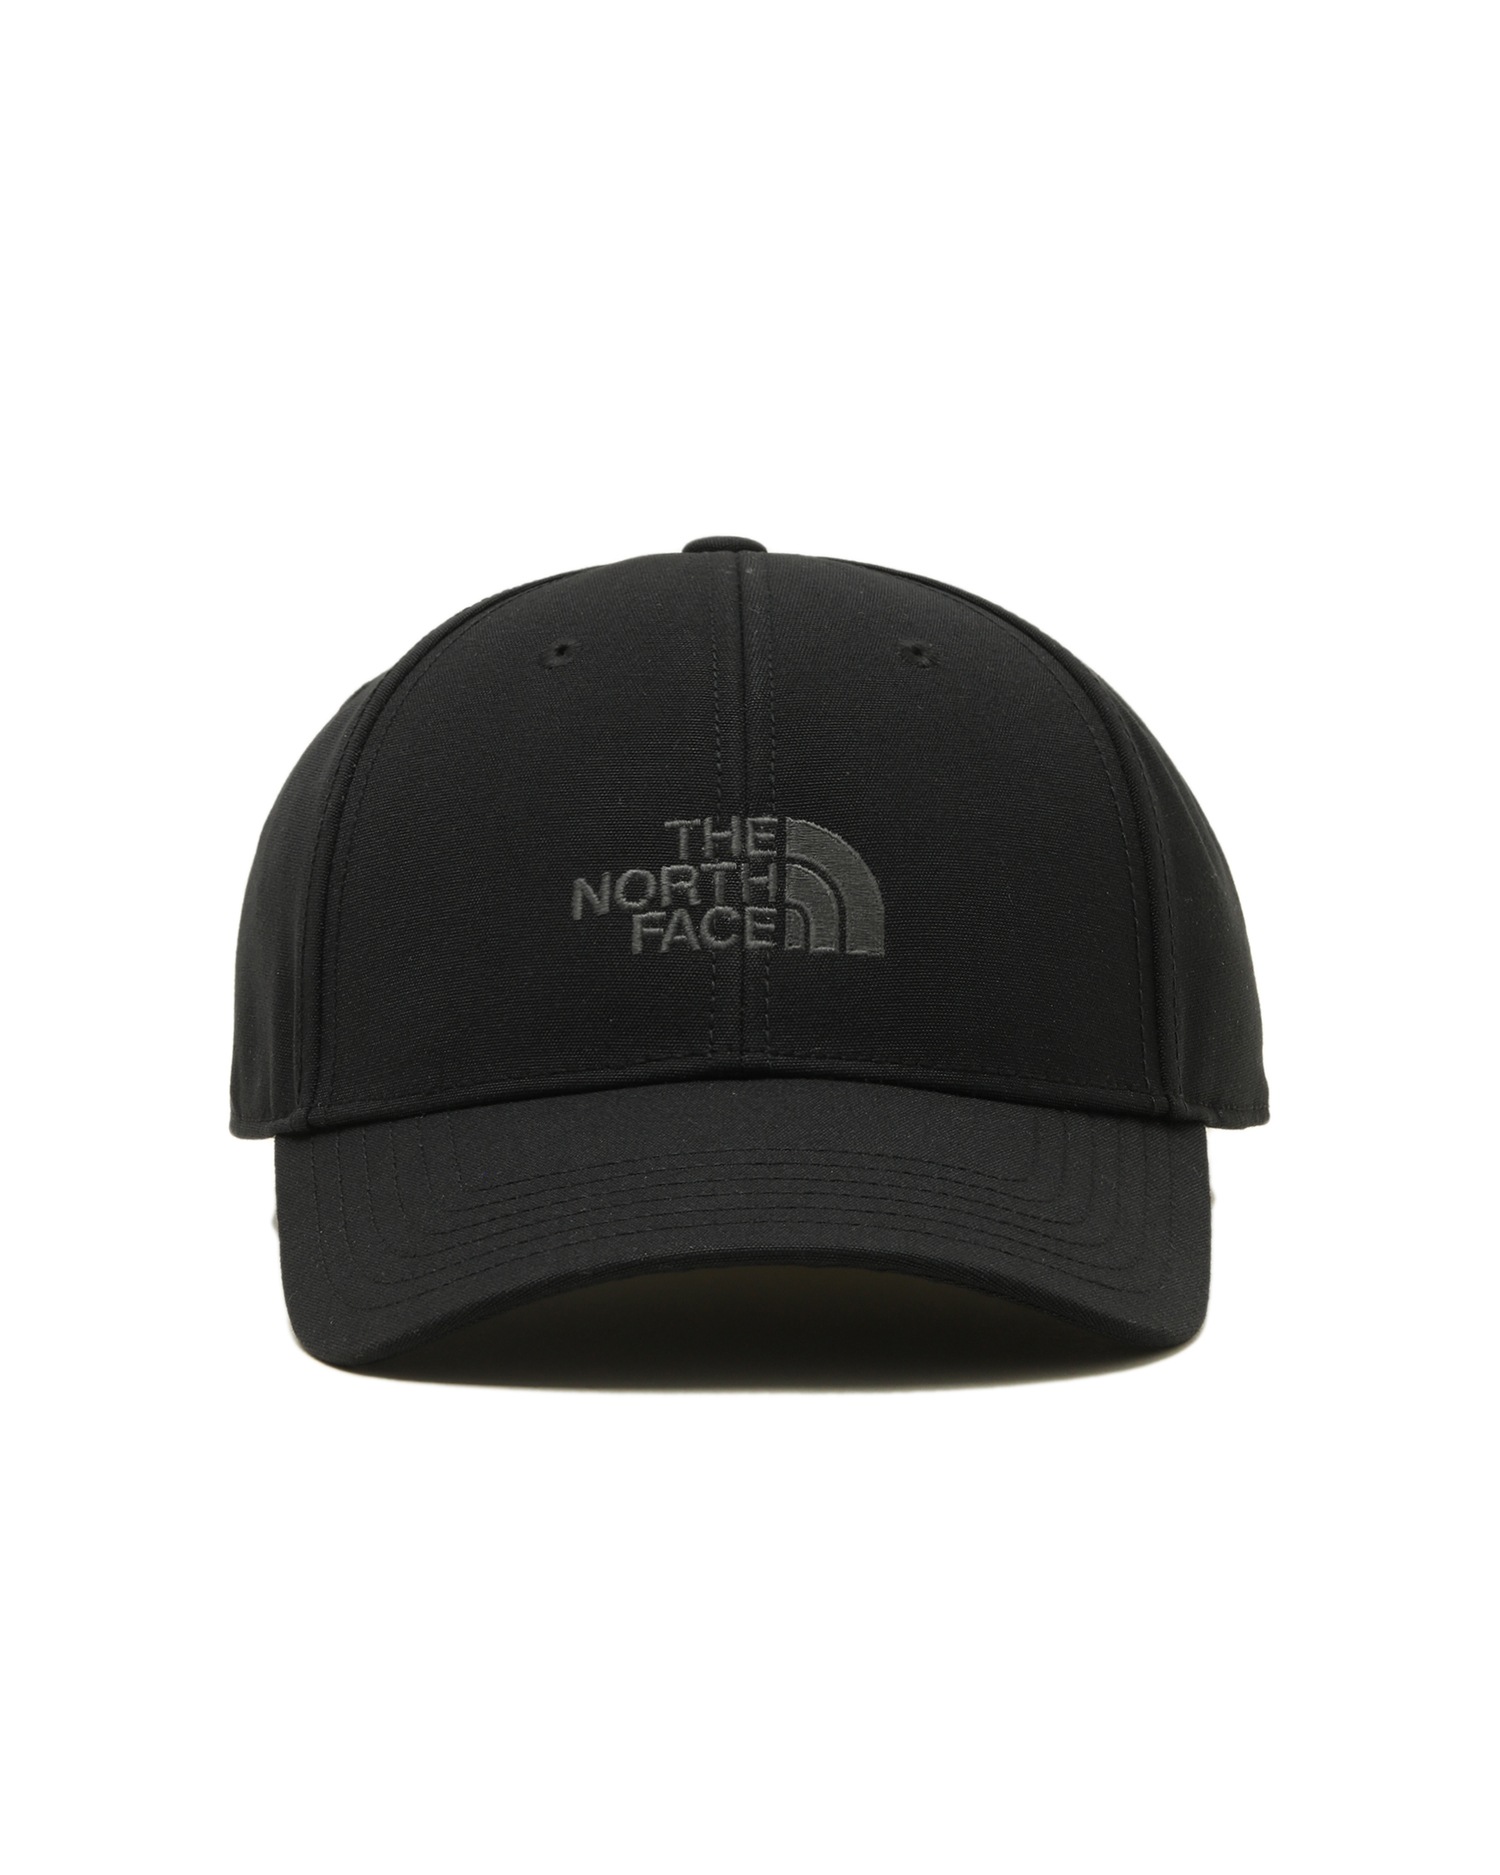 THE NORTH FACE Recycled 66 Classic cap